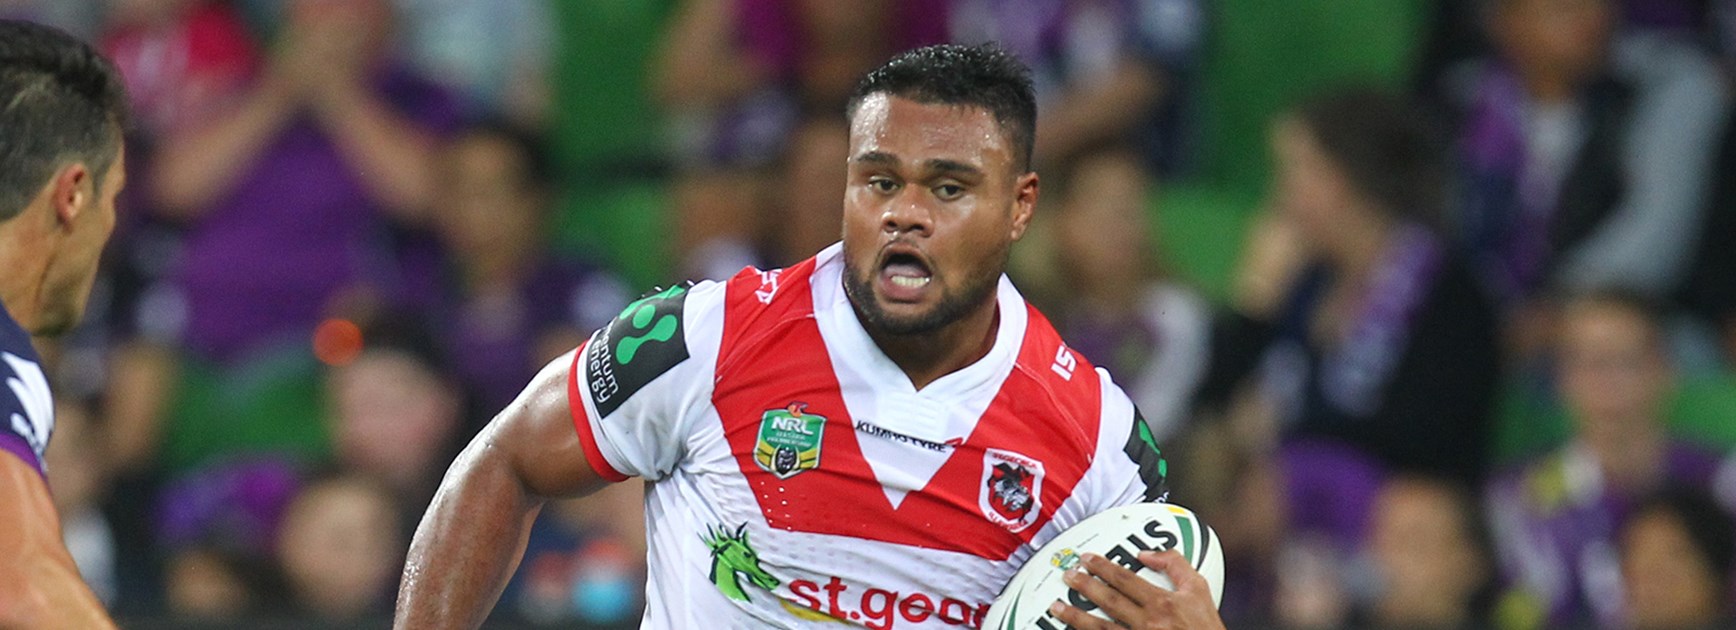 St George Illawarra forward Dunamis Lui in action for the Dragons in 2016.